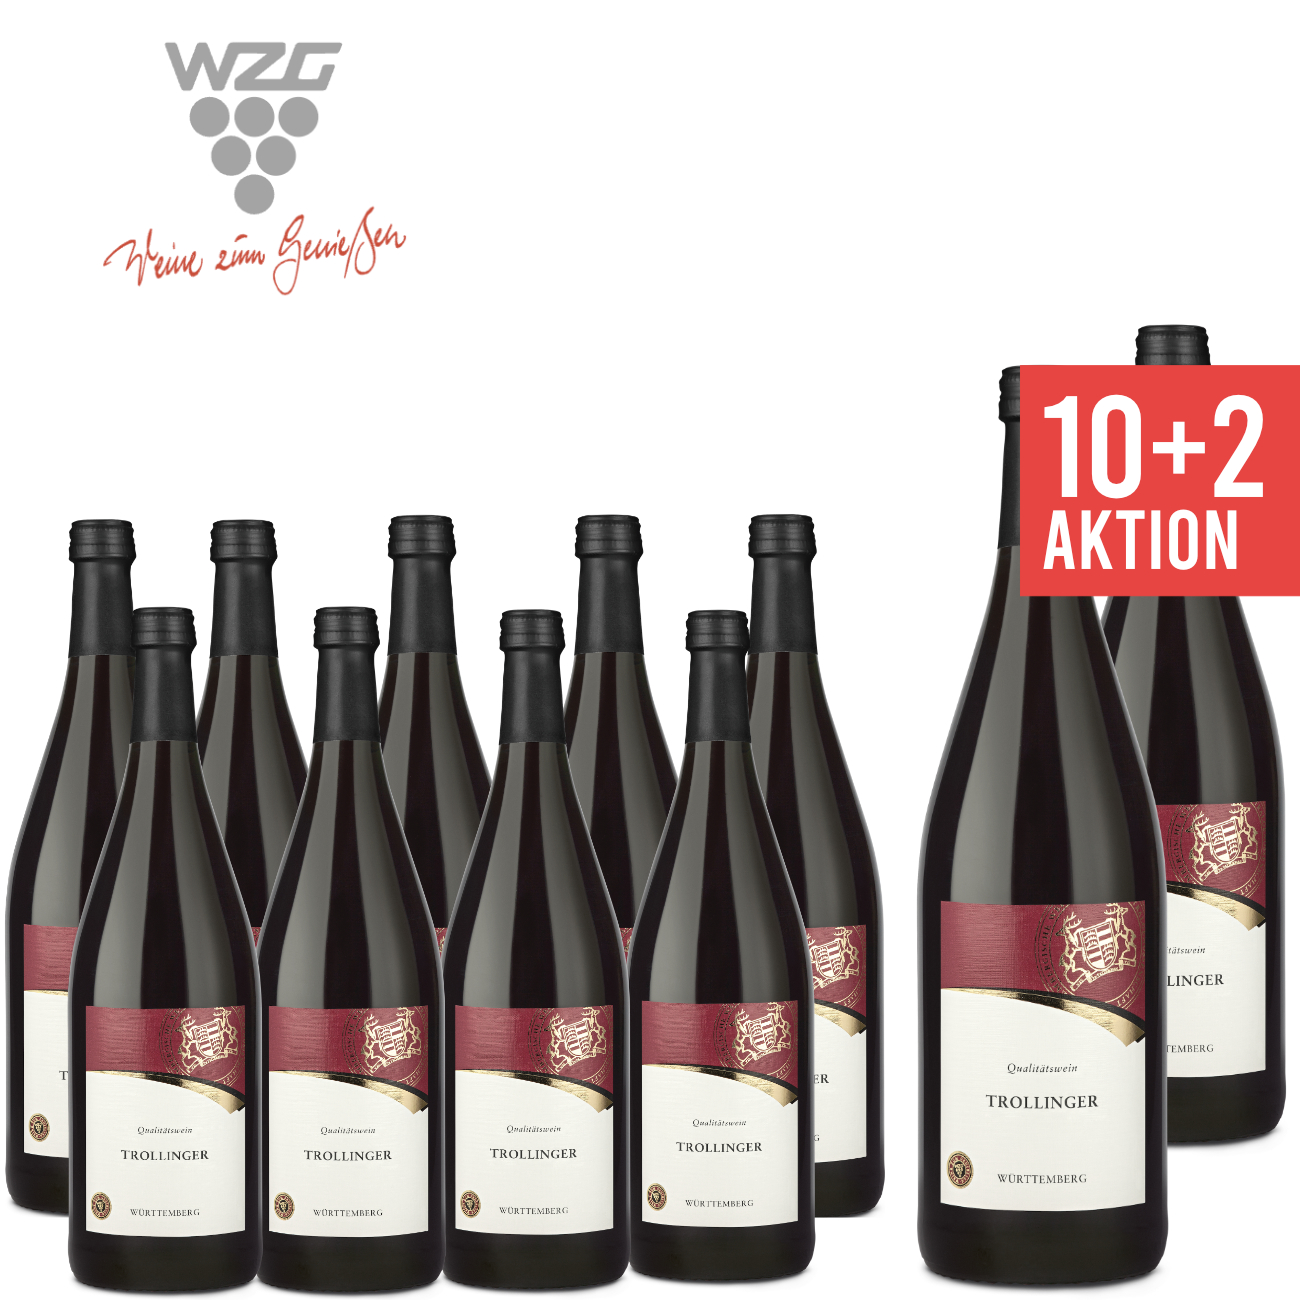 wein.plus Find+Buy: The wines of | members Find+Buy our wein.plus